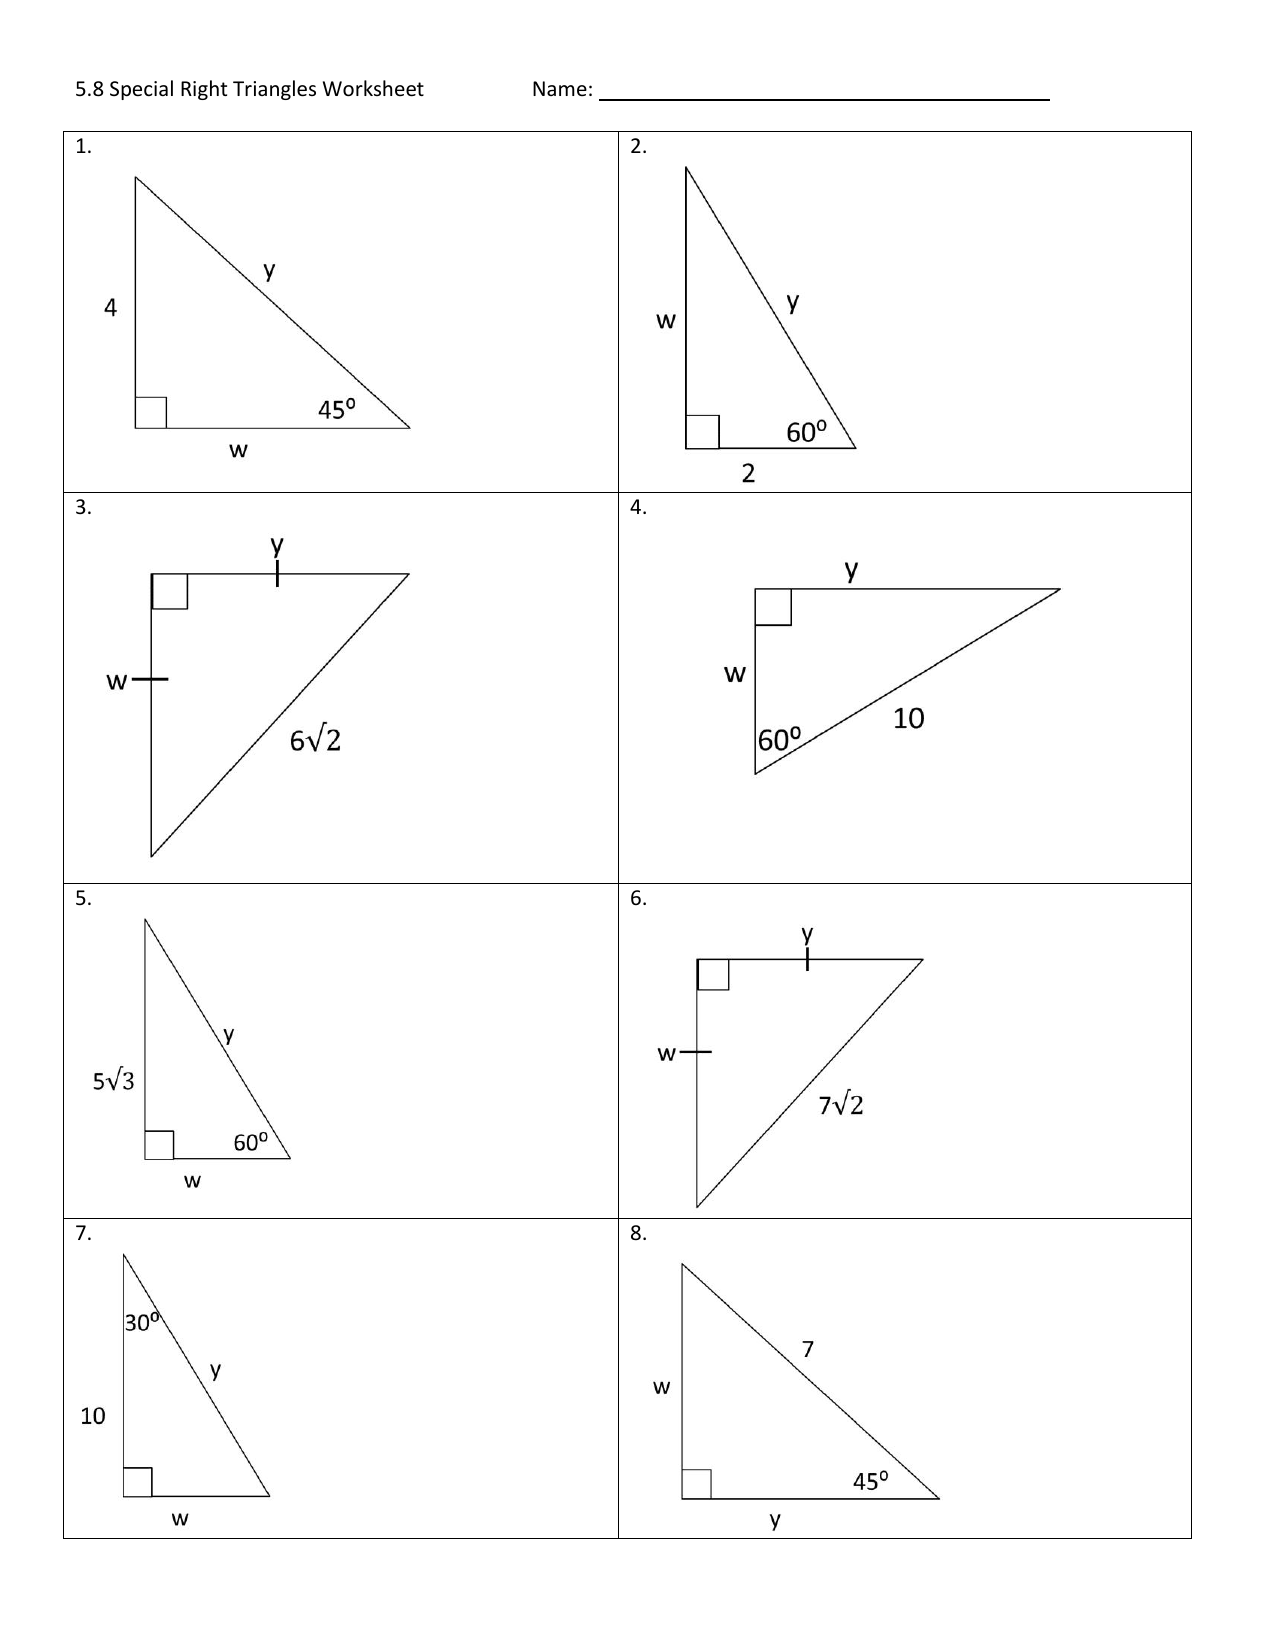 Solving Special Right Triangles Worksheet Free Download Goodimg co